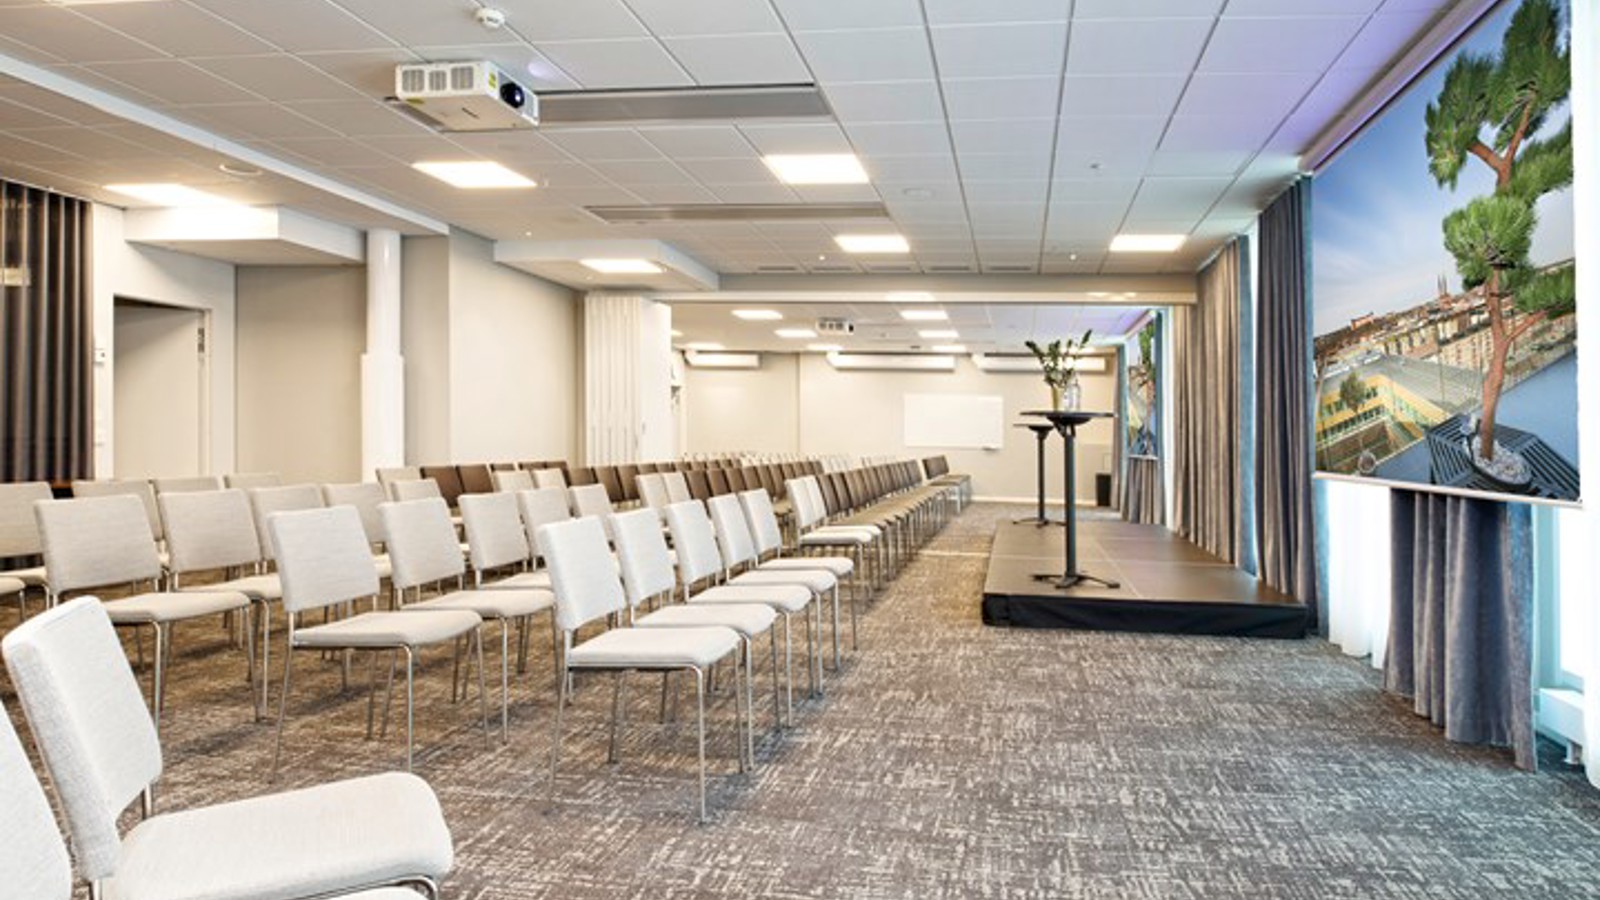 Conference room with cinema seating, gray floor, white chairs and white walls